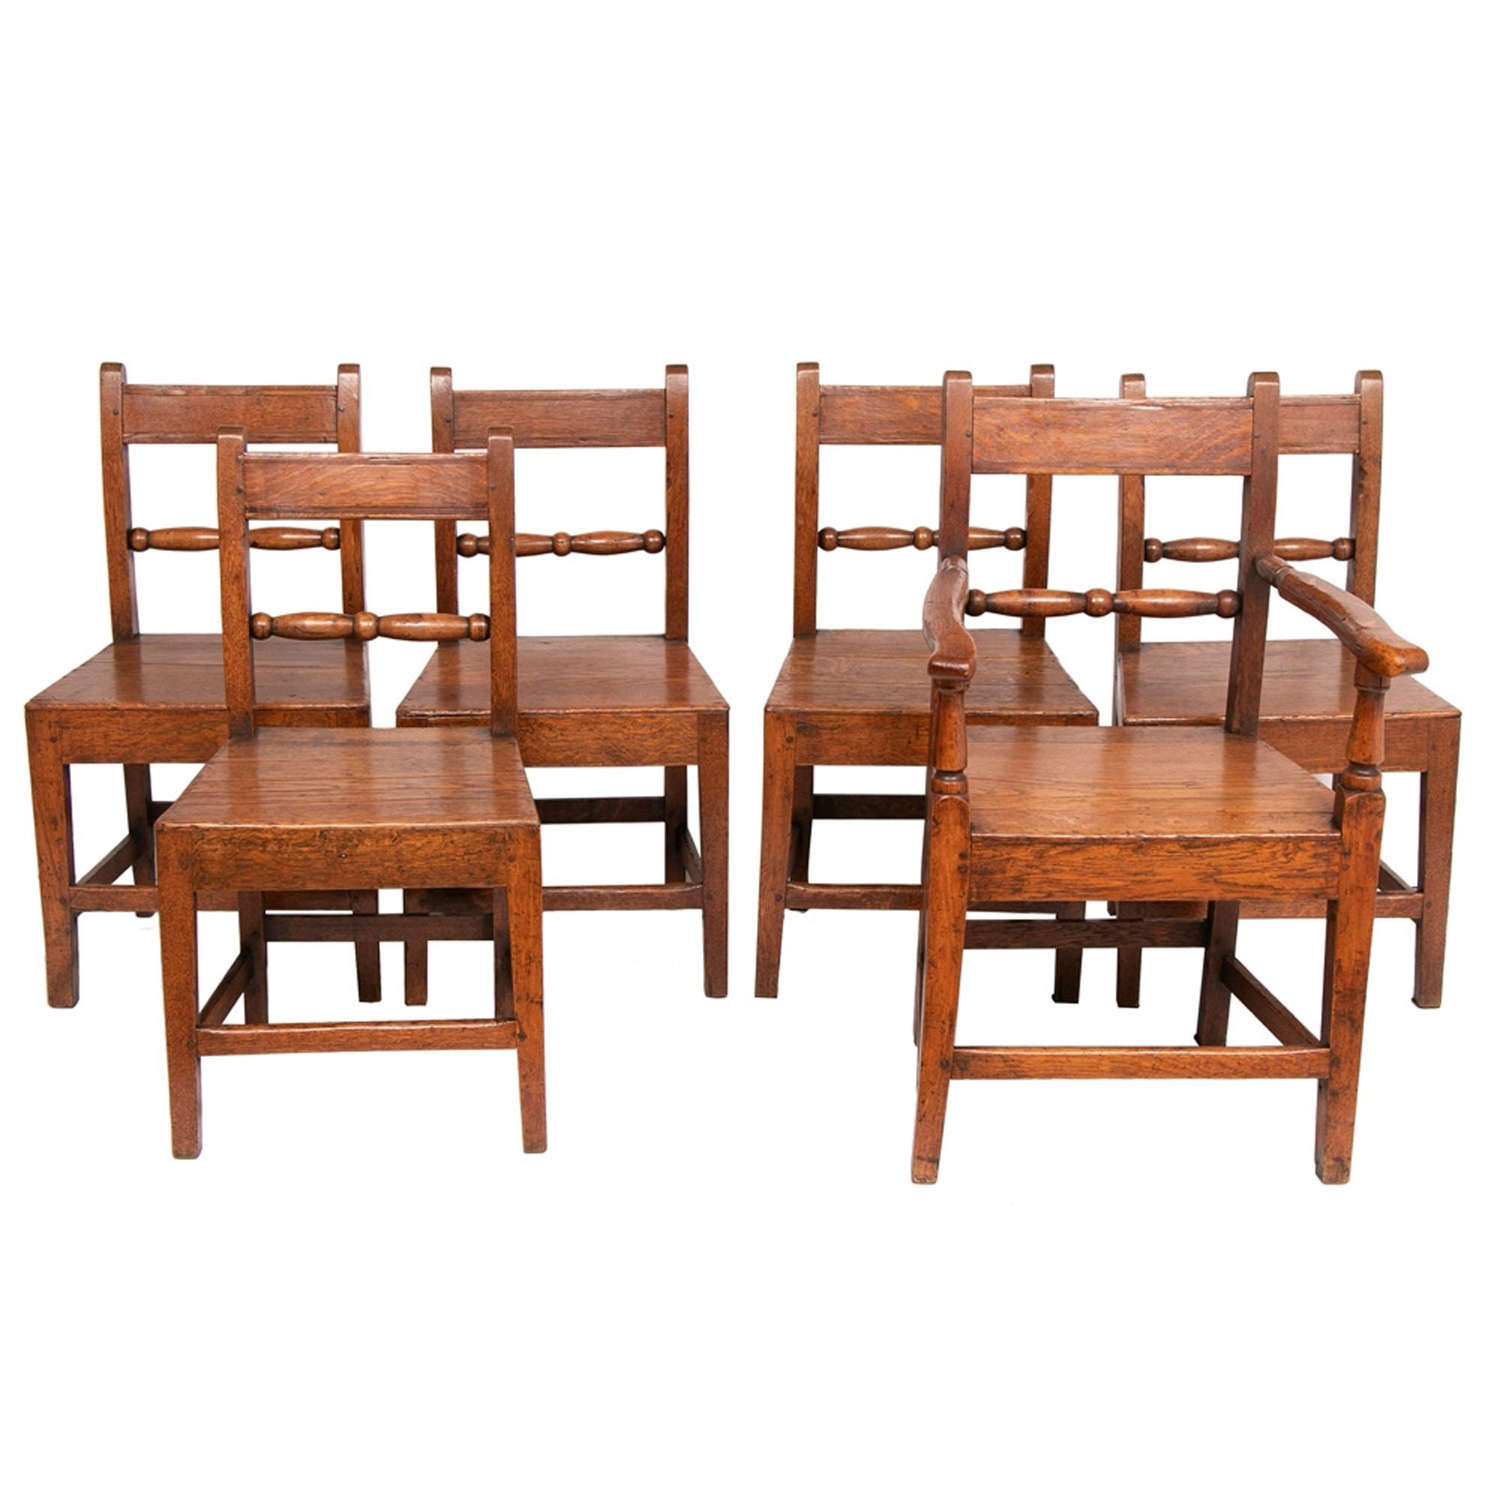 Early 1740s English Oak Set of Six Dining Chairs